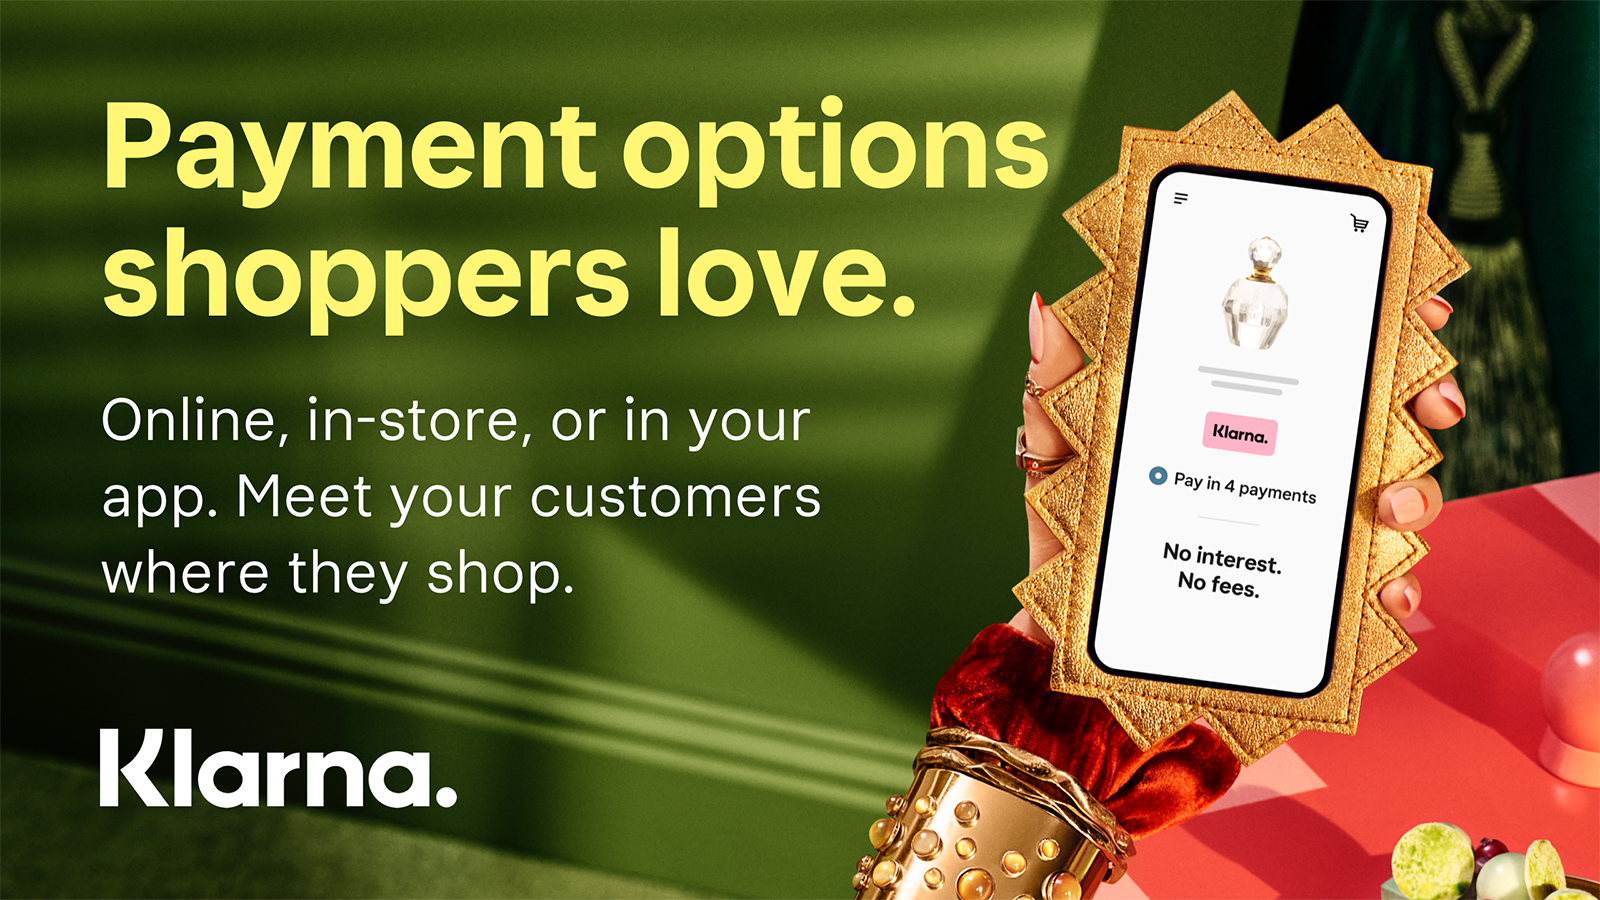 Payment options shoppers love.